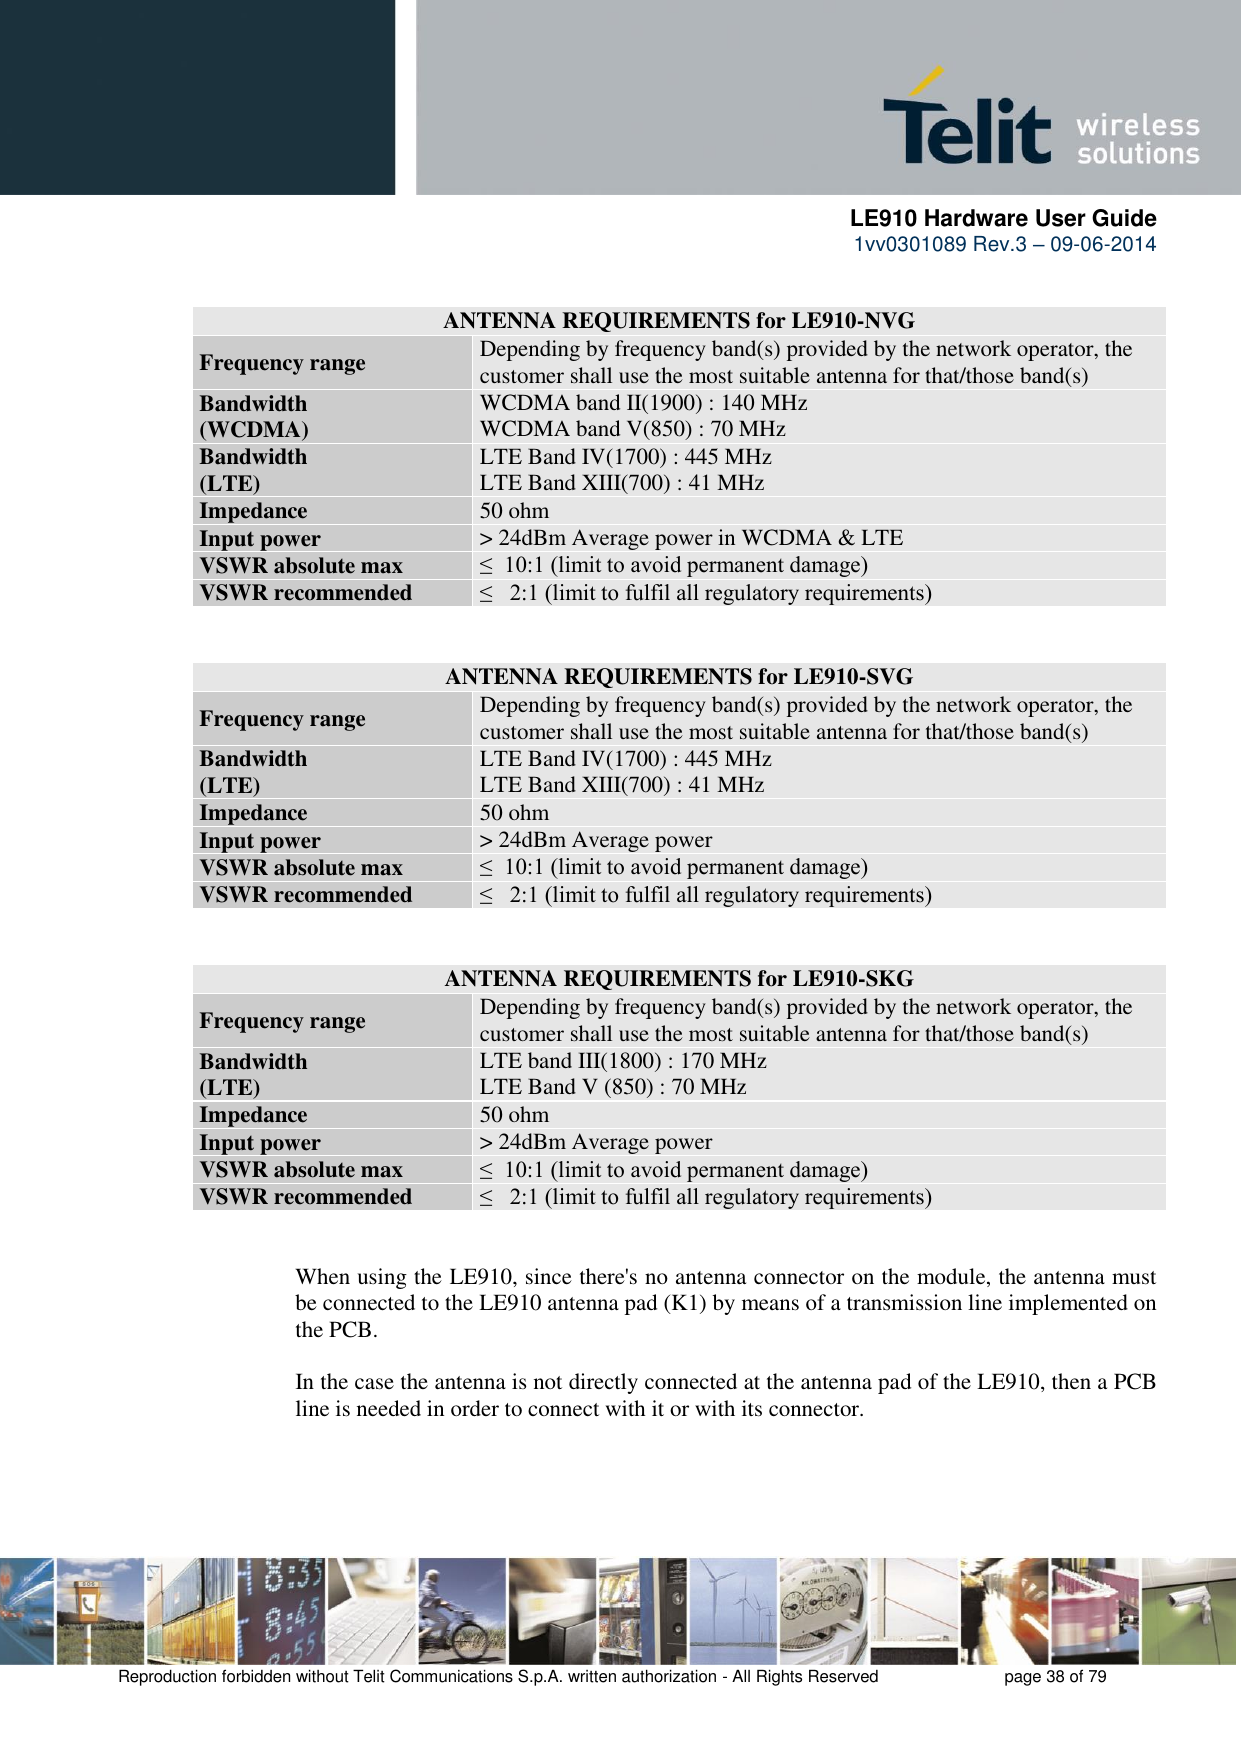      LE910 Hardware User Guide 1vv0301089 Rev.3 – 09-06-2014    Reproduction forbidden without Telit Communications S.p.A. written authorization - All Rights Reserved    page 38 of 79   ANTENNA REQUIREMENTS for LE910-NVG Frequency range Depending by frequency band(s) provided by the network operator, the customer shall use the most suitable antenna for that/those band(s) Bandwidth  (WCDMA) WCDMA band II(1900) : 140 MHz  WCDMA band V(850) : 70 MHz  Bandwidth  (LTE) LTE Band IV(1700) : 445 MHz  LTE Band XIII(700) : 41 MHz  Impedance 50 ohm Input power &gt; 24dBm Average power in WCDMA &amp; LTE  VSWR absolute max ≤  10:1 (limit to avoid permanent damage) VSWR recommended ≤   2:1 (limit to fulfil all regulatory requirements)  ANTENNA REQUIREMENTS for LE910-SVG Frequency range Depending by frequency band(s) provided by the network operator, the customer shall use the most suitable antenna for that/those band(s) Bandwidth  (LTE) LTE Band IV(1700) : 445 MHz  LTE Band XIII(700) : 41 MHz  Impedance 50 ohm Input power &gt; 24dBm Average power VSWR absolute max ≤  10:1 (limit to avoid permanent damage) VSWR recommended ≤   2:1 (limit to fulfil all regulatory requirements)  ANTENNA REQUIREMENTS for LE910-SKG Frequency range Depending by frequency band(s) provided by the network operator, the customer shall use the most suitable antenna for that/those band(s) Bandwidth  (LTE) LTE band III(1800) : 170 MHz  LTE Band V (850) : 70 MHz  Impedance 50 ohm Input power &gt; 24dBm Average power VSWR absolute max ≤  10:1 (limit to avoid permanent damage) VSWR recommended ≤   2:1 (limit to fulfil all regulatory requirements)   When using the LE910, since there&apos;s no antenna connector on the module, the antenna must be connected to the LE910 antenna pad (K1) by means of a transmission line implemented on the PCB.  In the case the antenna is not directly connected at the antenna pad of the LE910, then a PCB line is needed in order to connect with it or with its connector.  